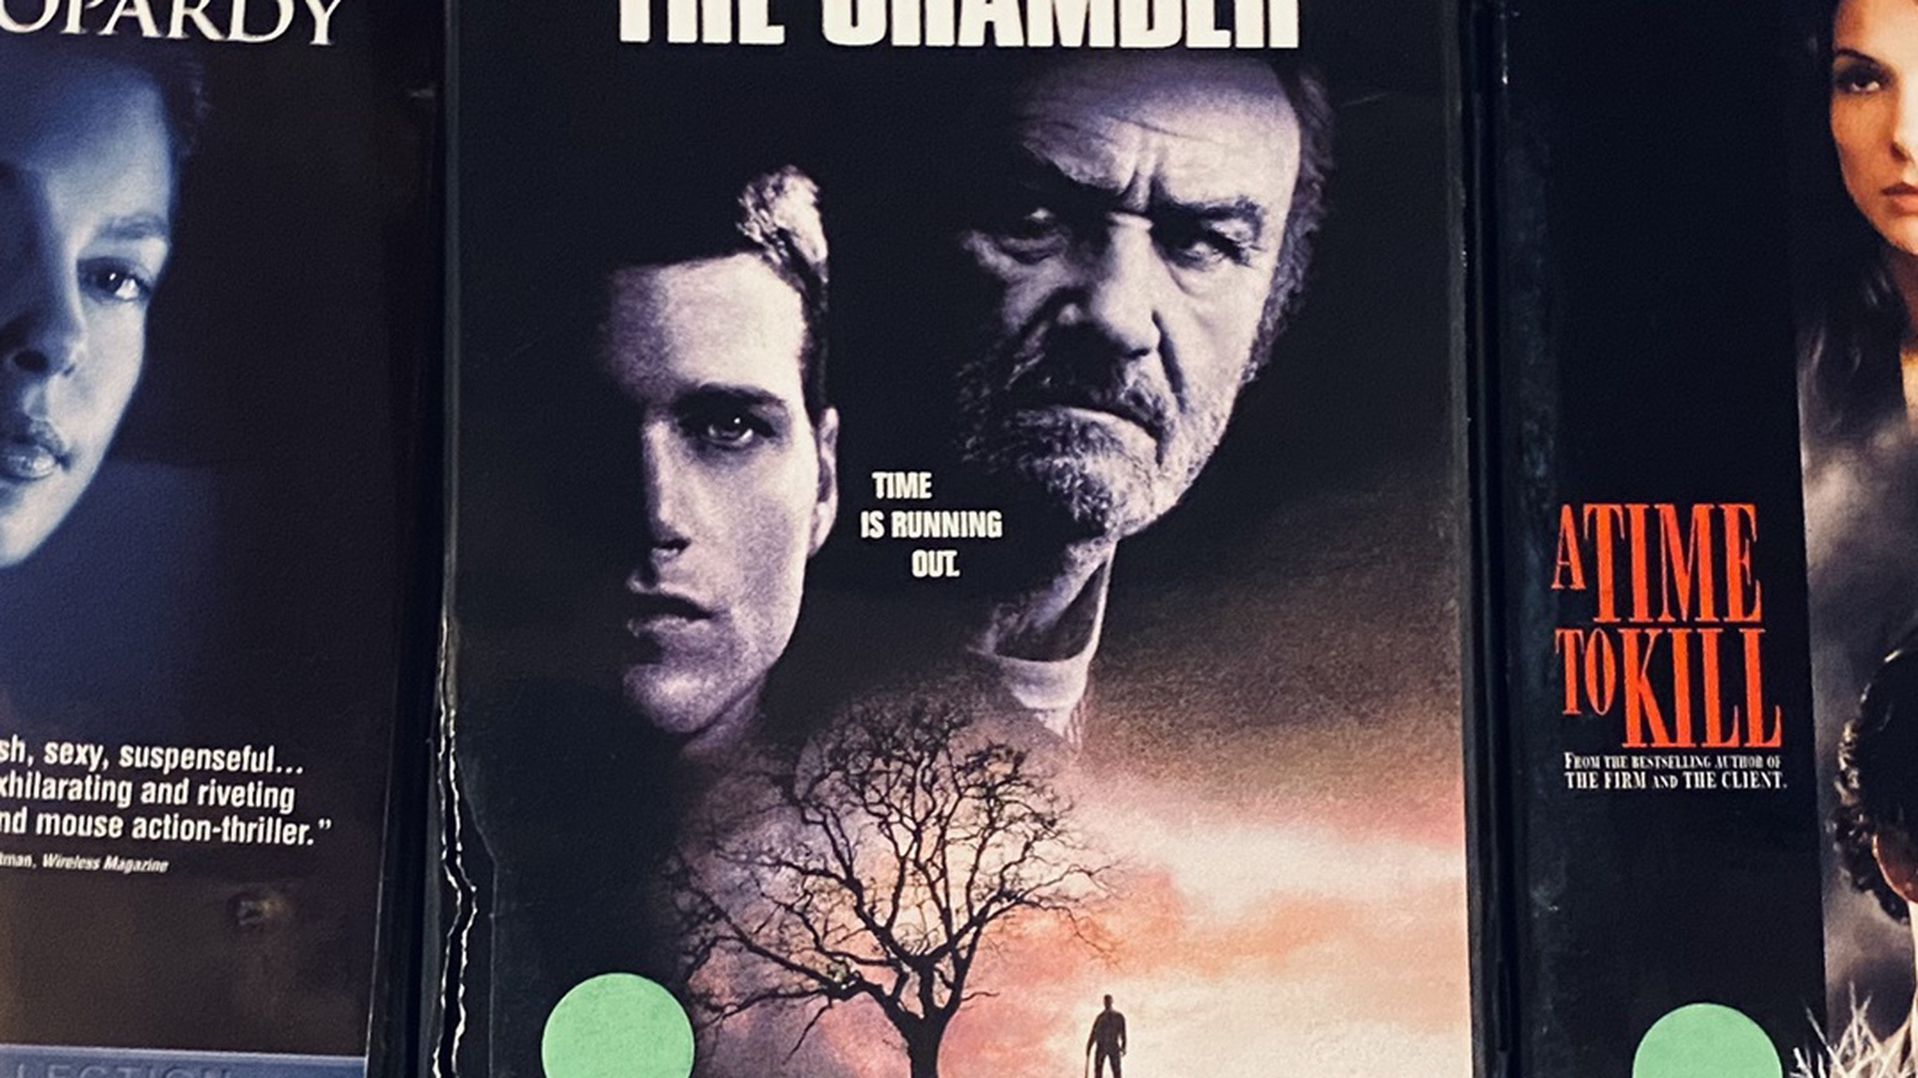 3 DISC THRILLER DVD MOVIE SET: Includes The Chamber, A Time To Kill, & Double Jeopardy